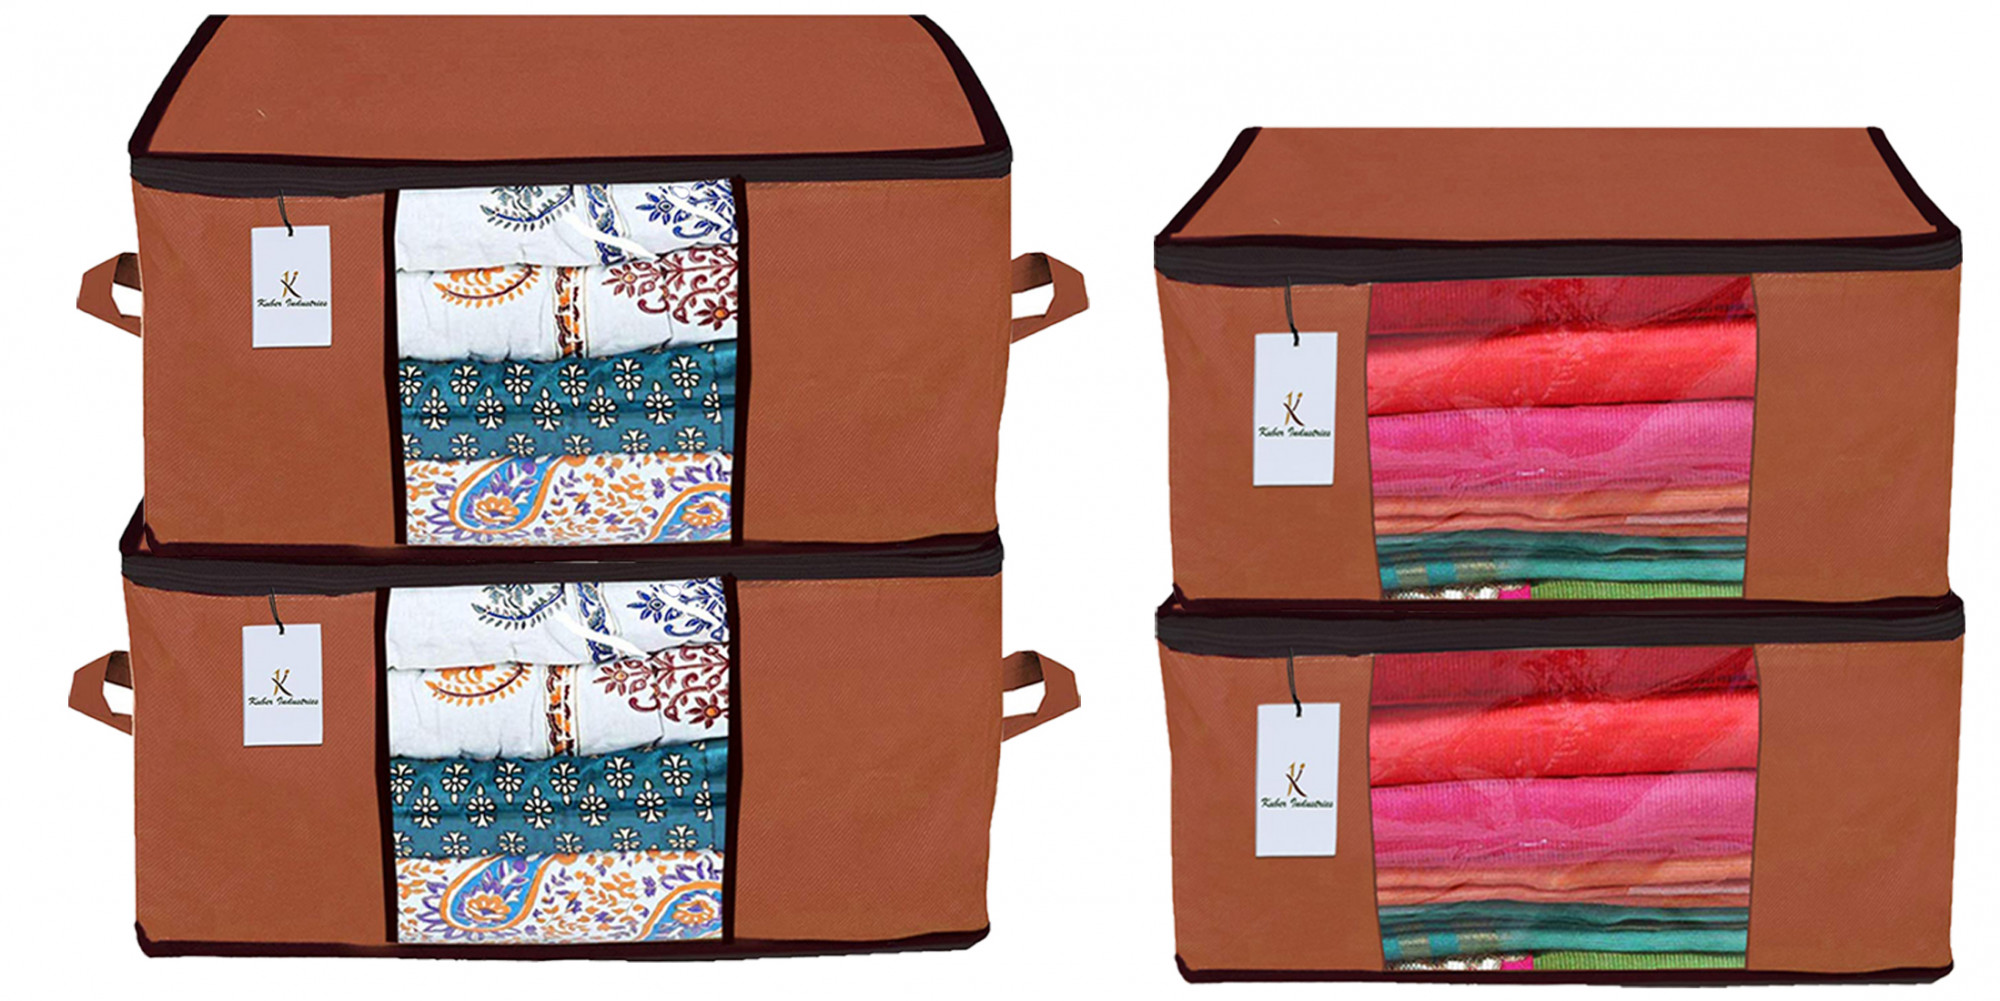 Kuber Industries Non Woven Saree Cover And Underbed Storage Bag, Cloth Organizer For Storage, Blanket Cover Combo Set (Brown) -CTKTC38499